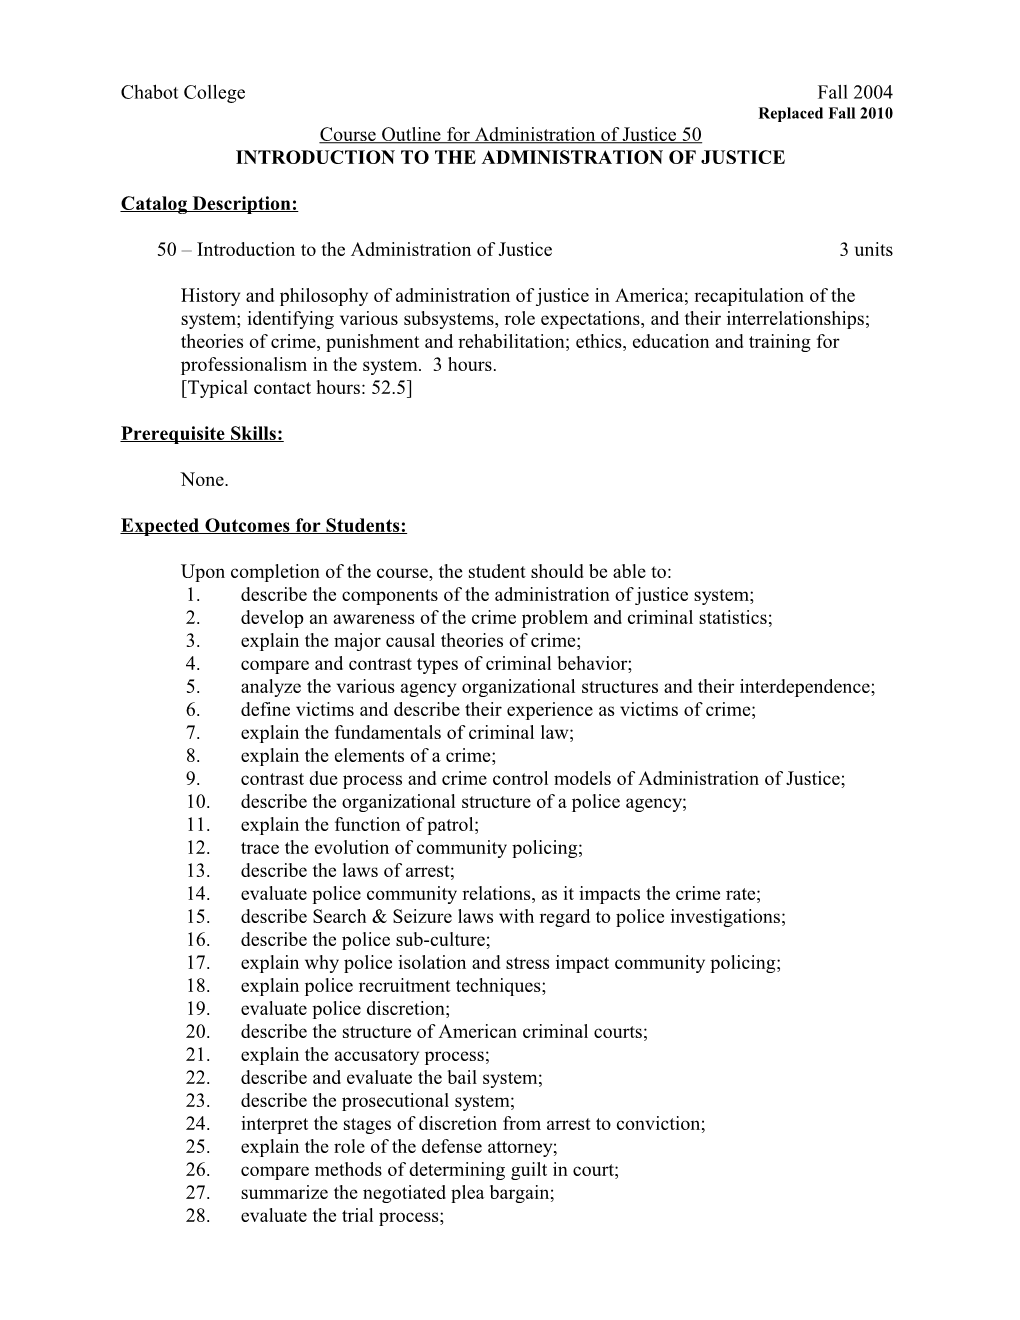 Course Outline for Administration of Justice 50, Page 1